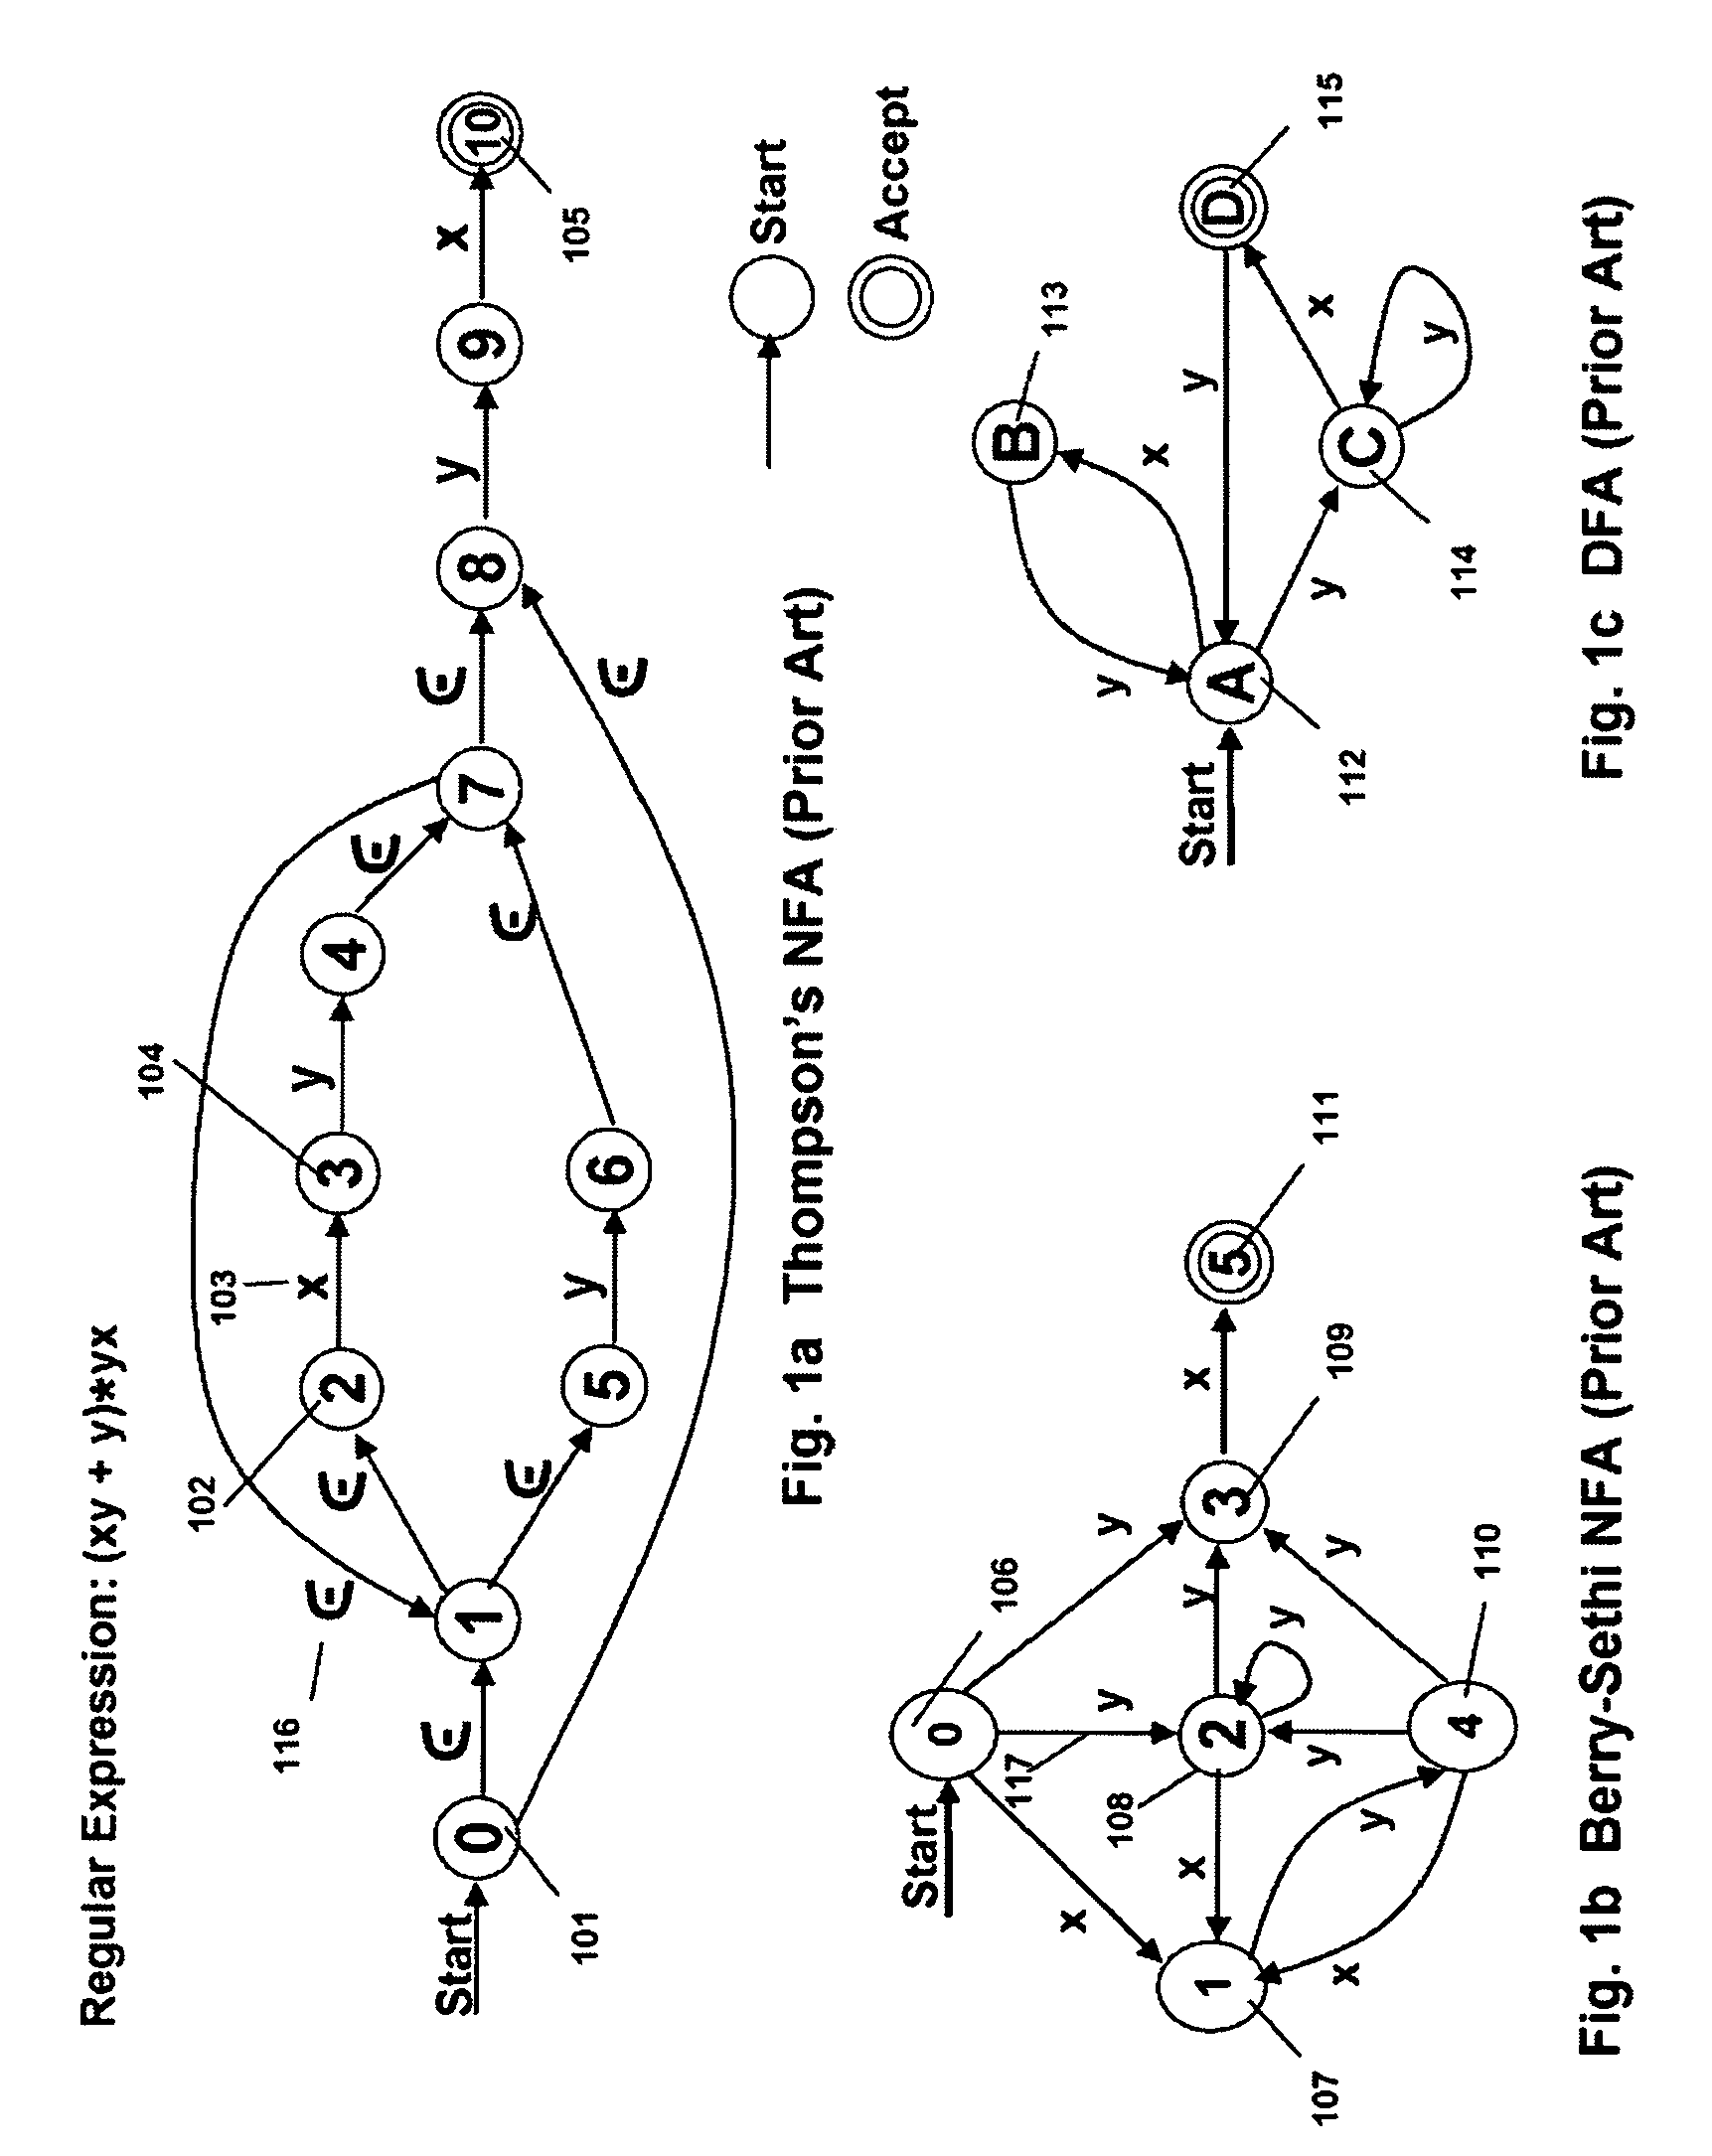 FSA Context Switch Architecture for Programmable Intelligent Search Memory